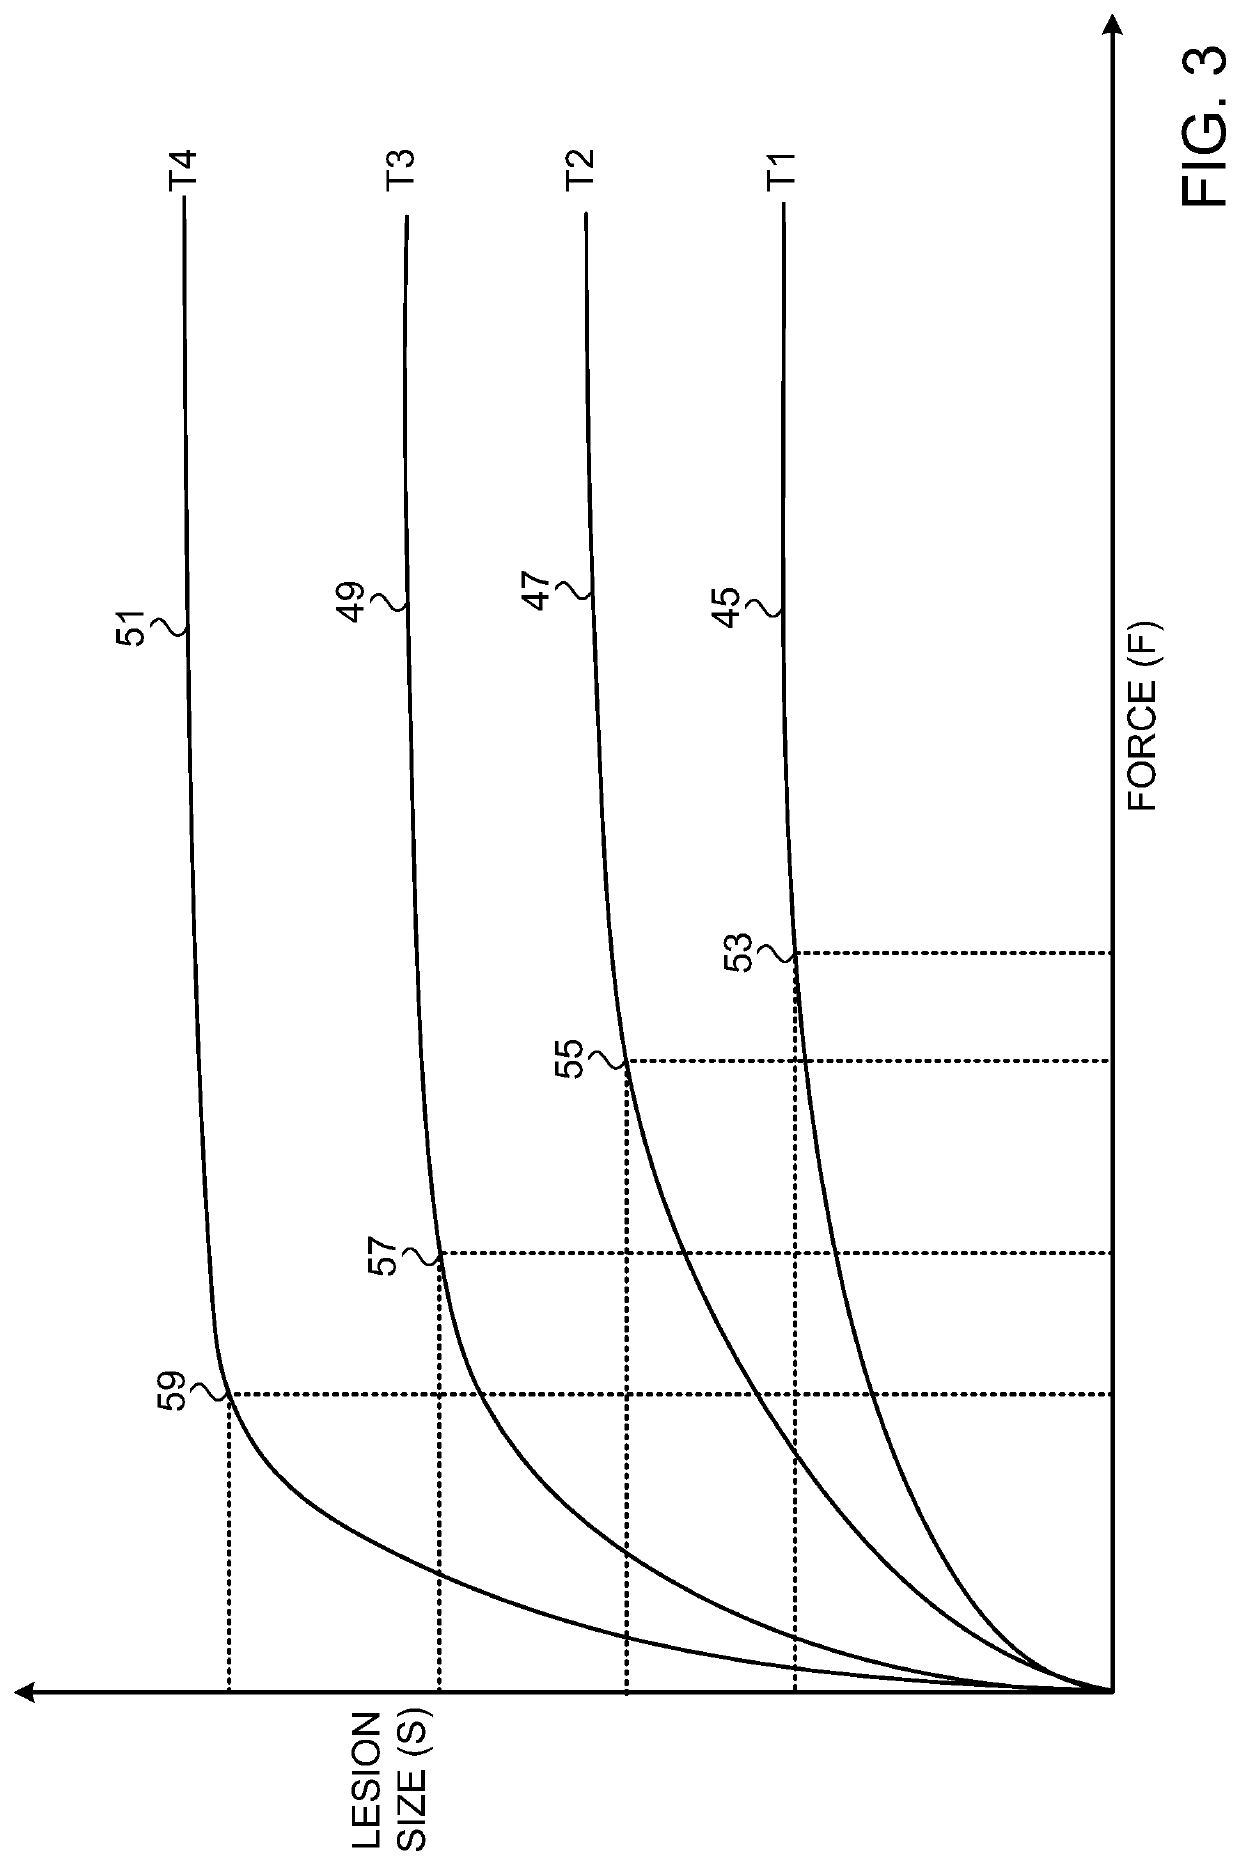 Ablation power control based on contact force